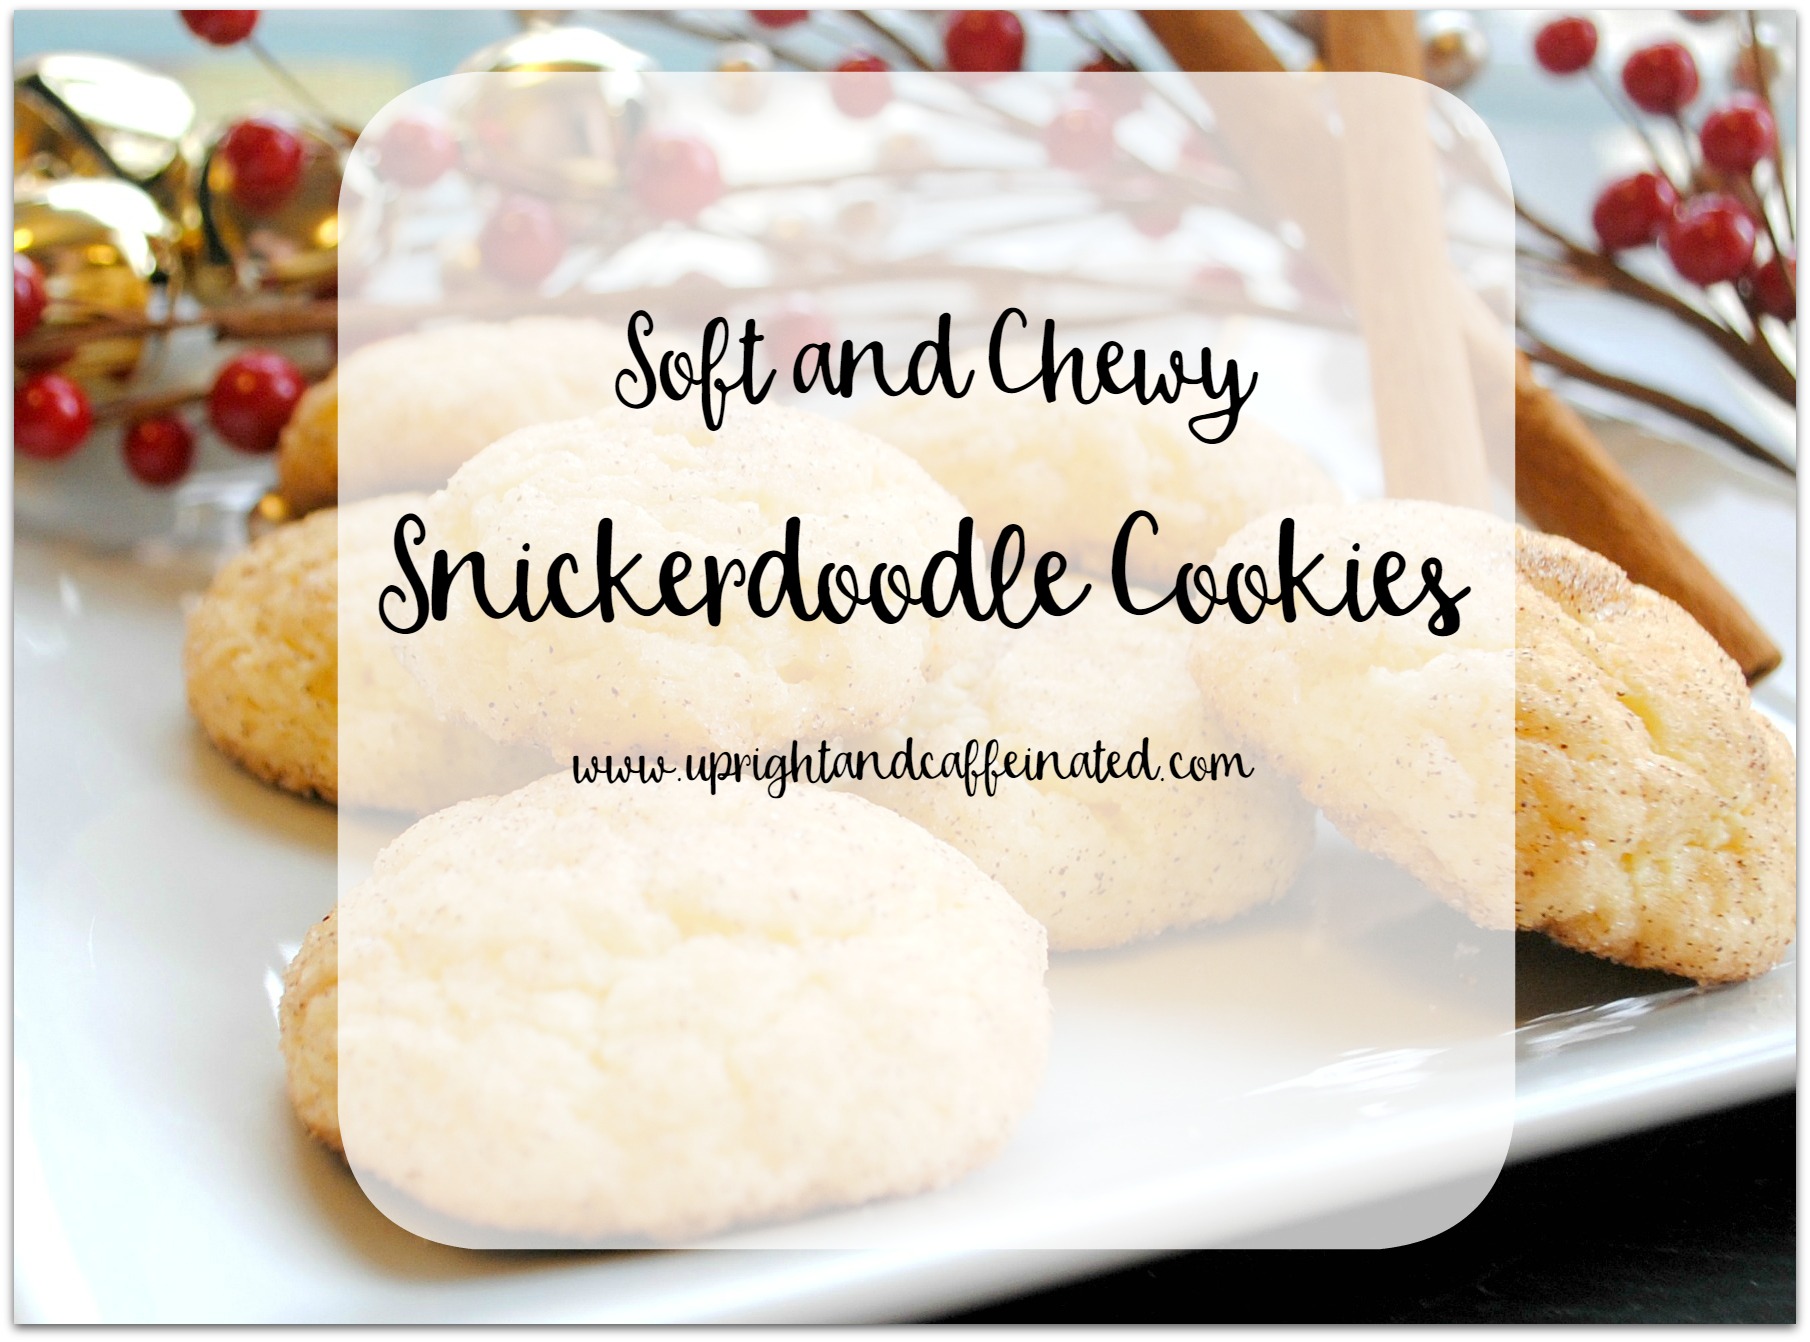 The most delicious Snickerdoodle Cookies you will ever make! Upright and Caffeinated